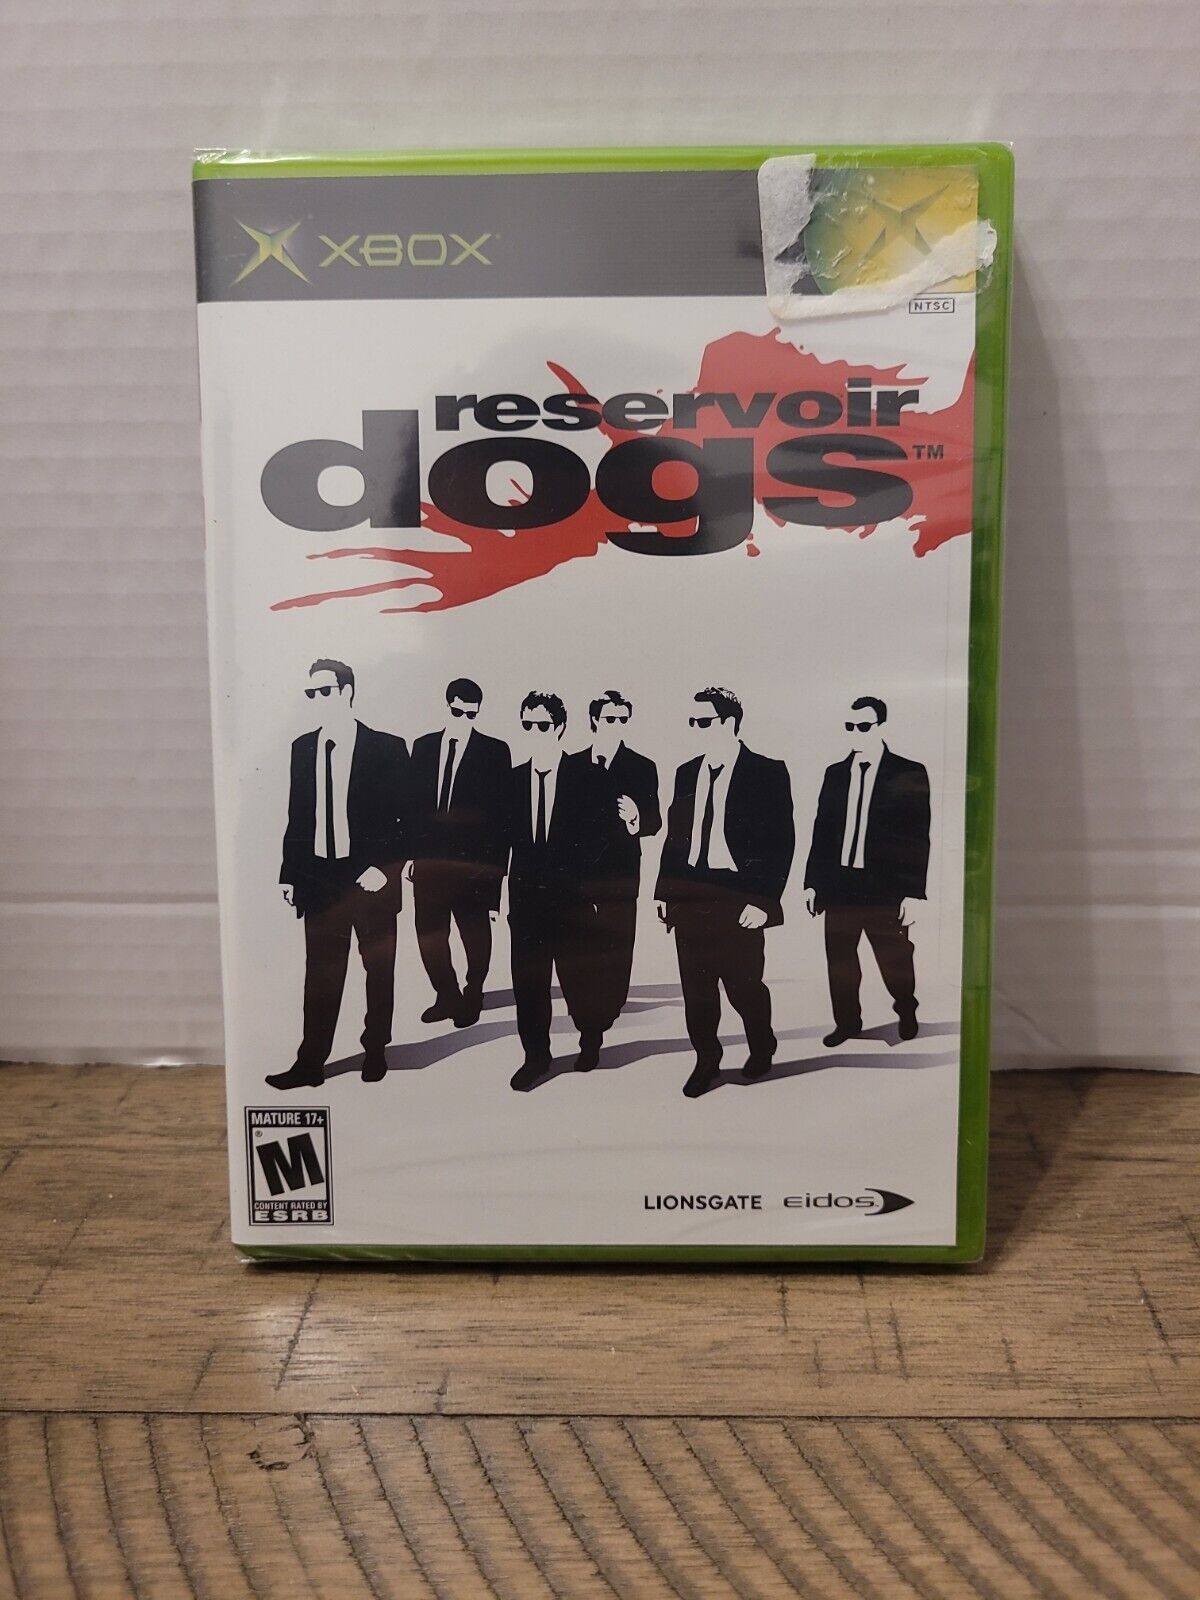 Xbox "Reservoir Dogs" Brand New, Factory Sealed